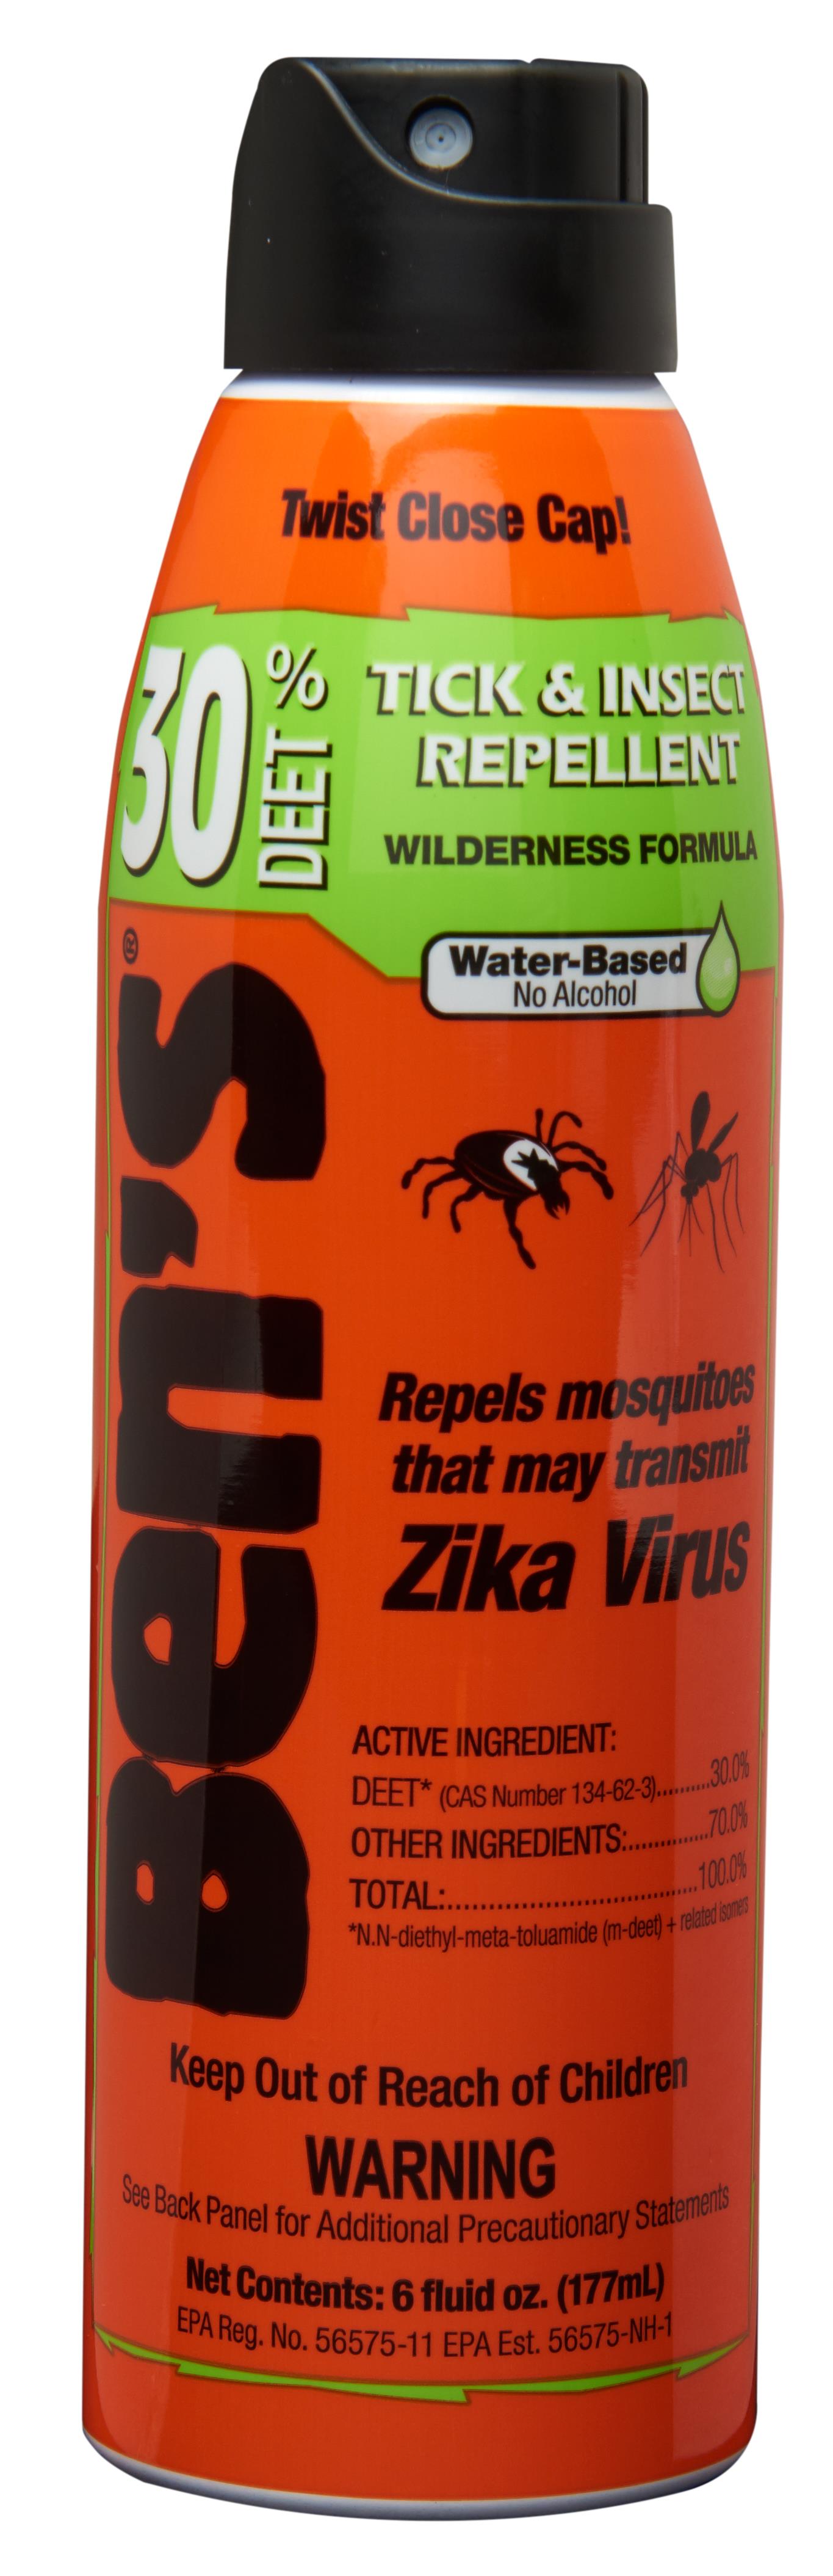 BENS 30 TICK & INSECT REPELLENT 6 OZ - Insect Repellent